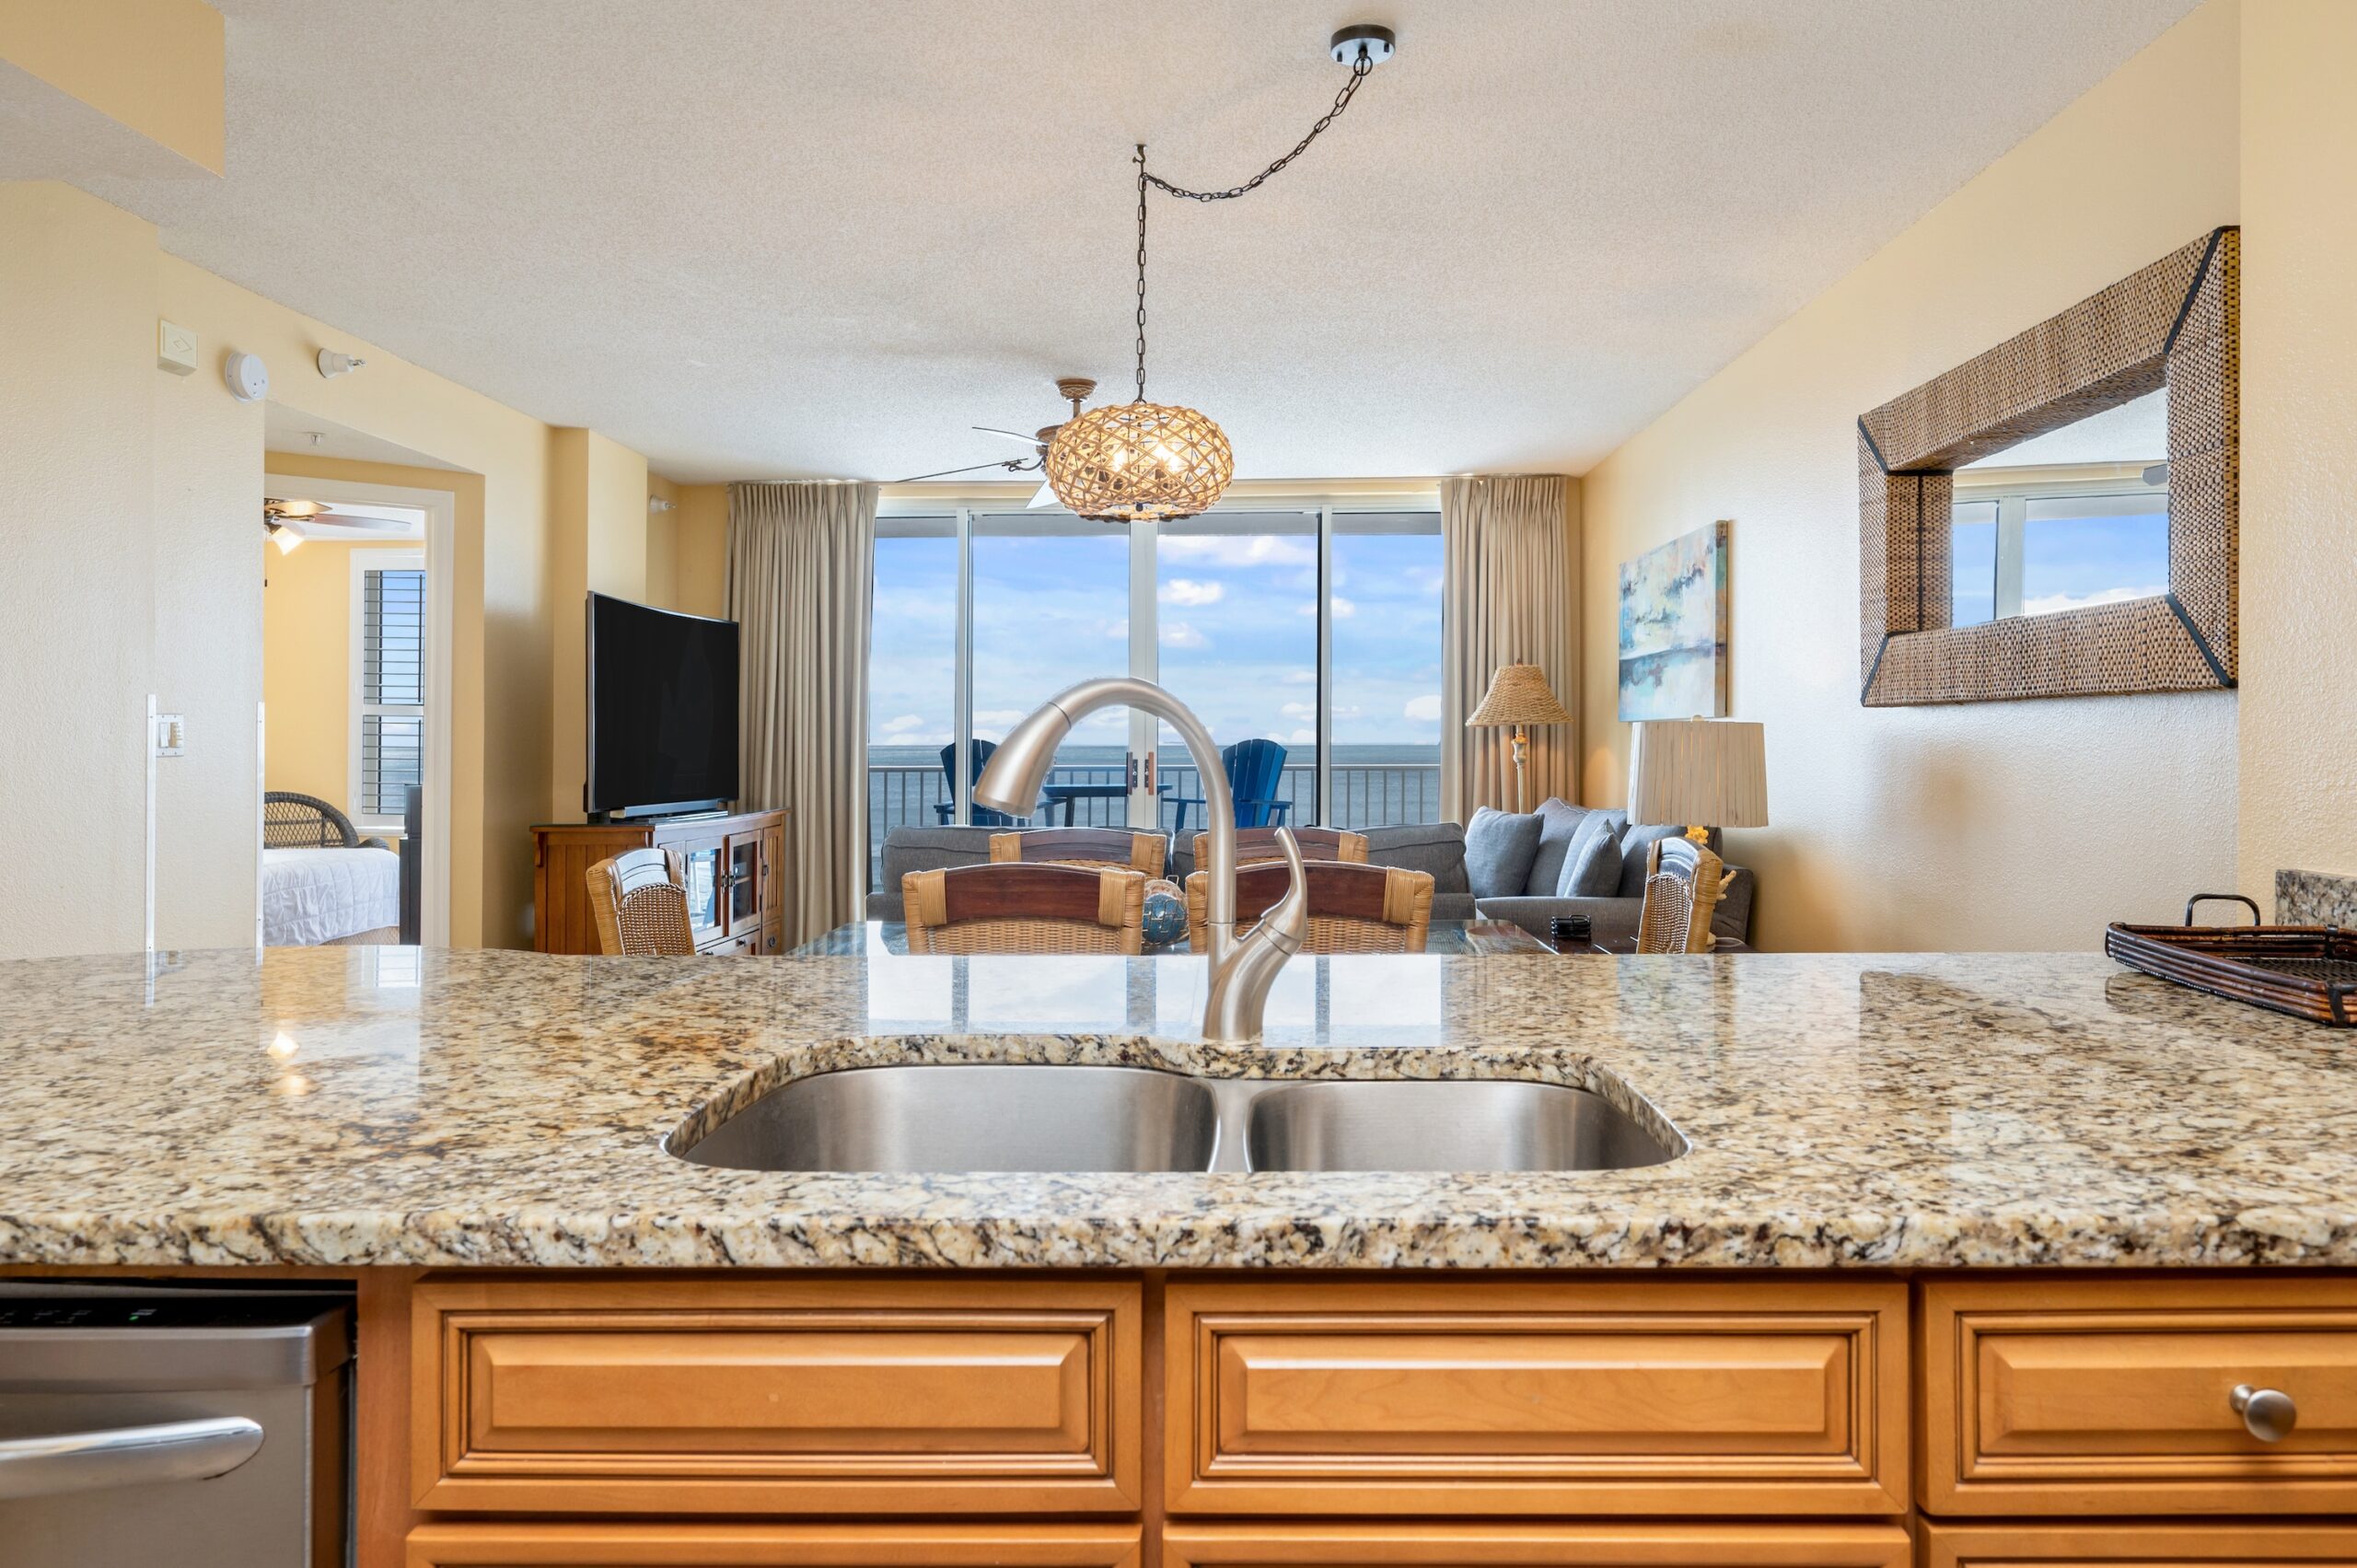 Stunning ocean view from the beach condo's kitchen